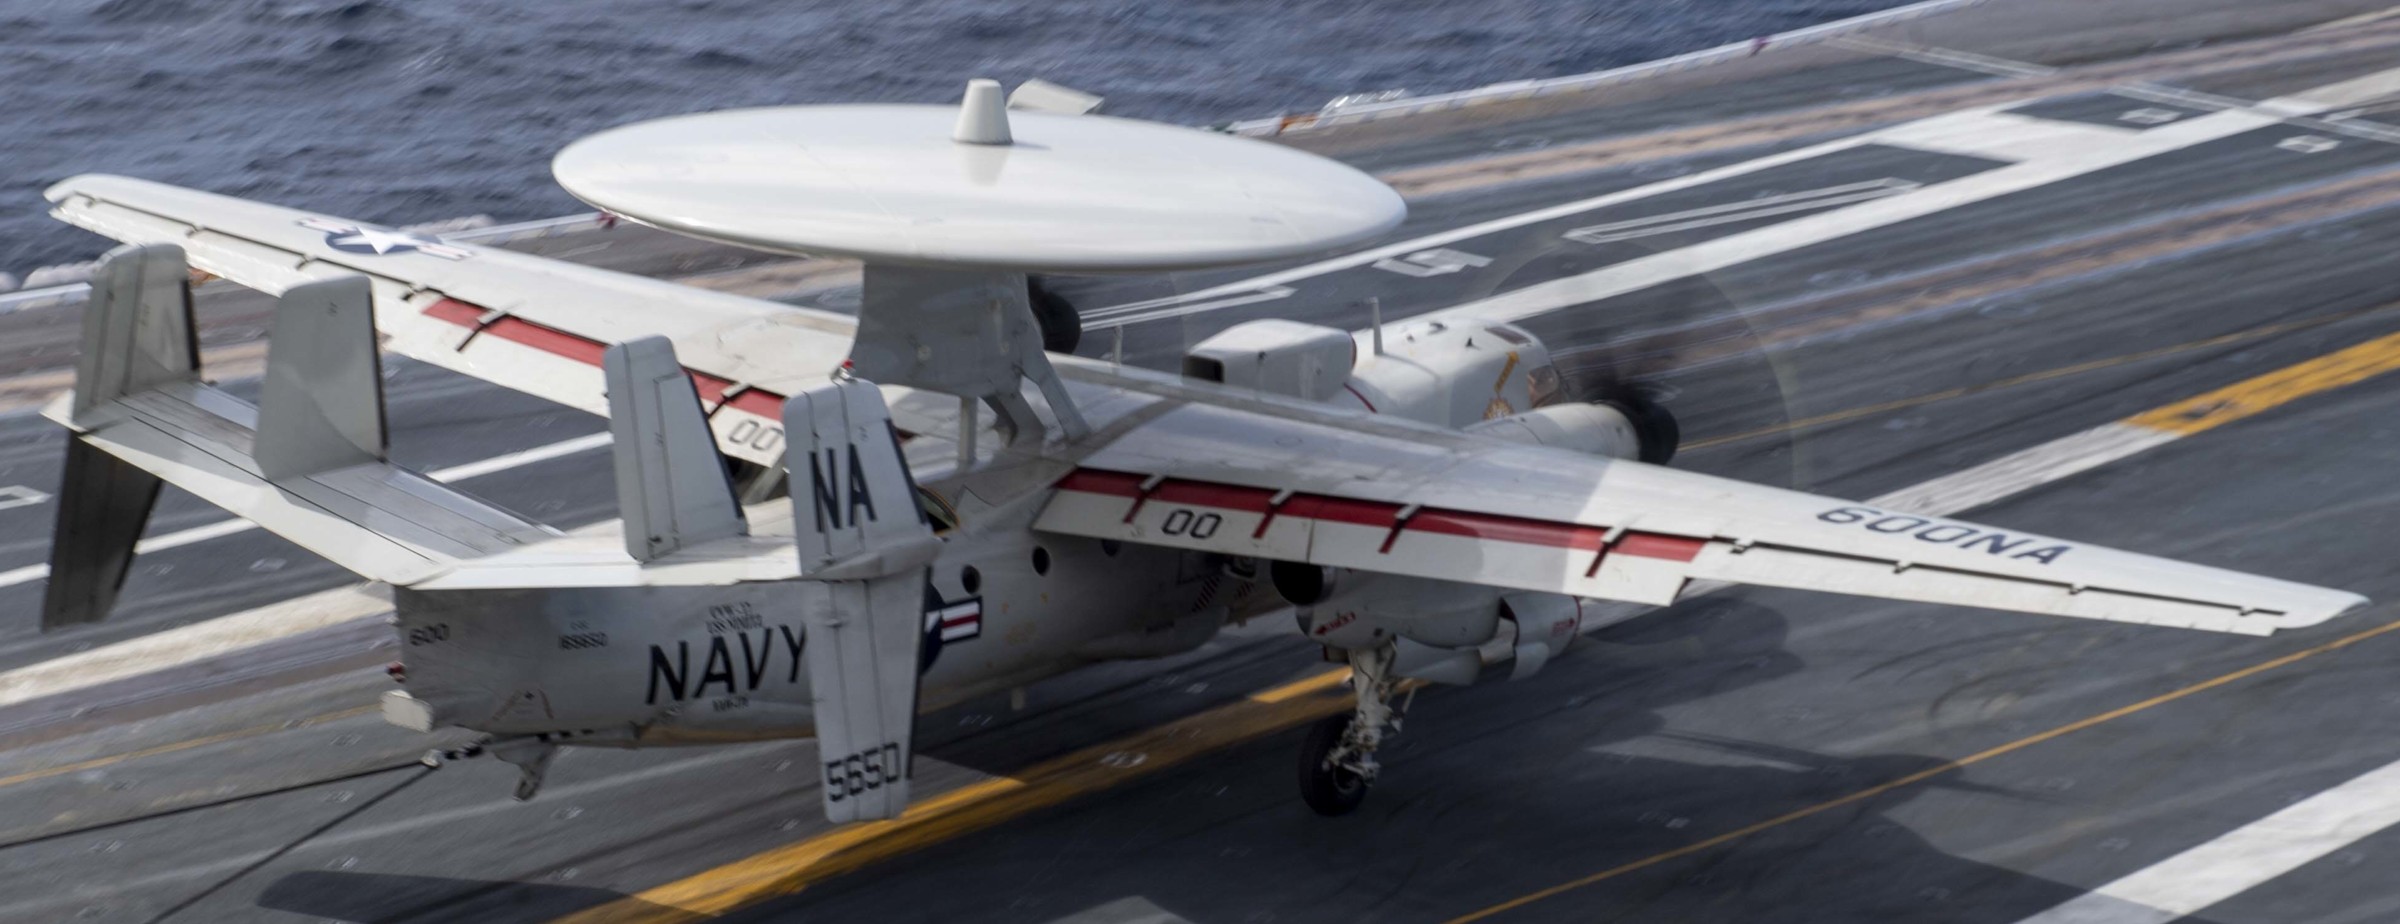 vaw-116 sun kings airborne command control squadron carrier early warning cvw-17 uss nimitz cvn-68 112